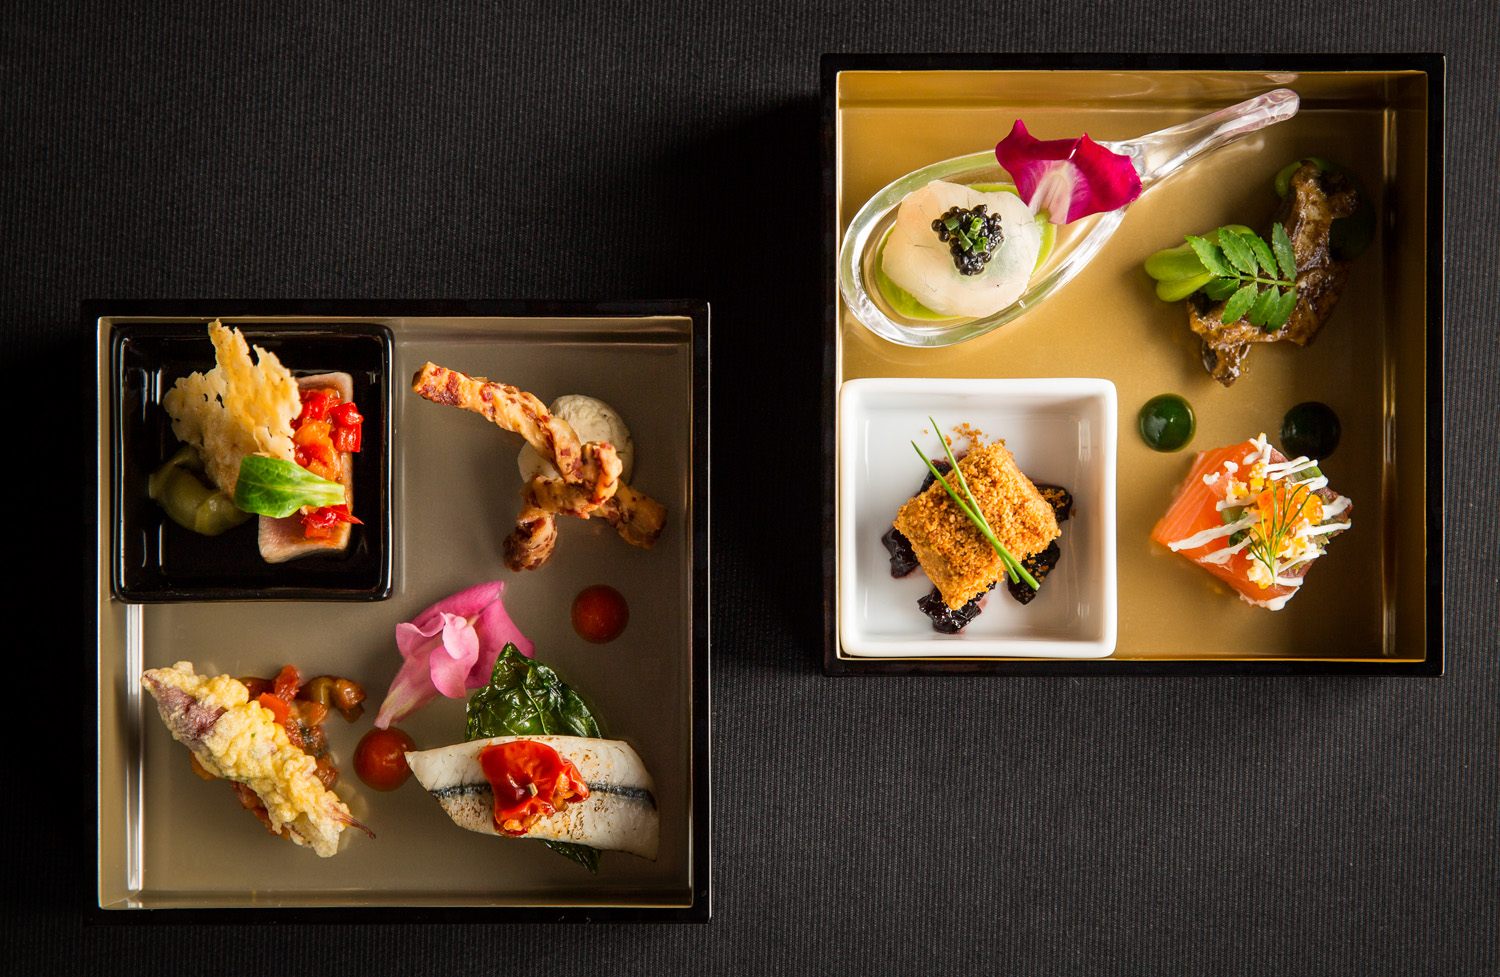 A Japanese-Western eclectic dish that is a feast for all the senses created with passion from a world-renowned chef.